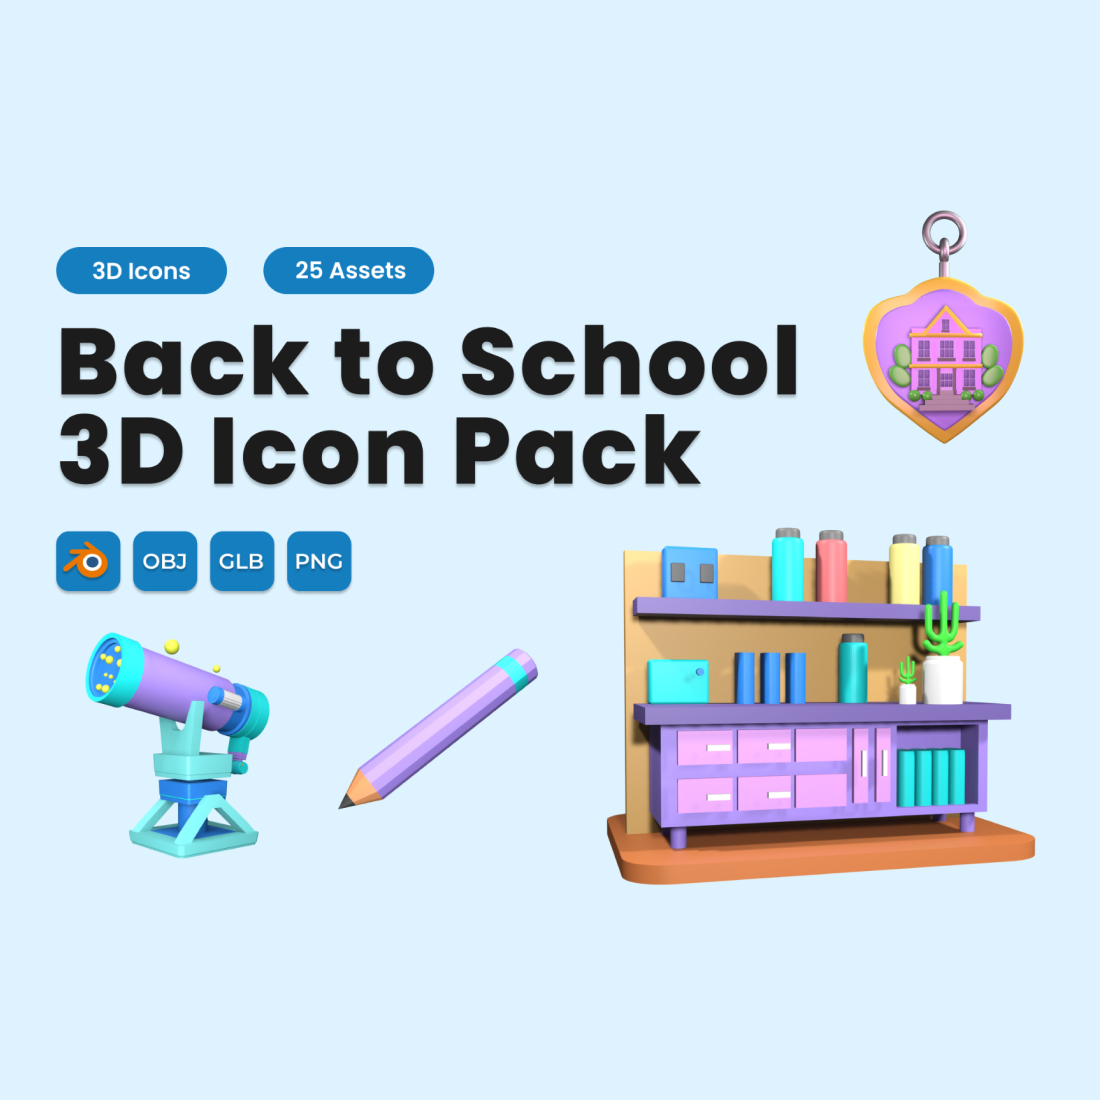 Back to School 3D Icon Pack Vol 3 preview image.